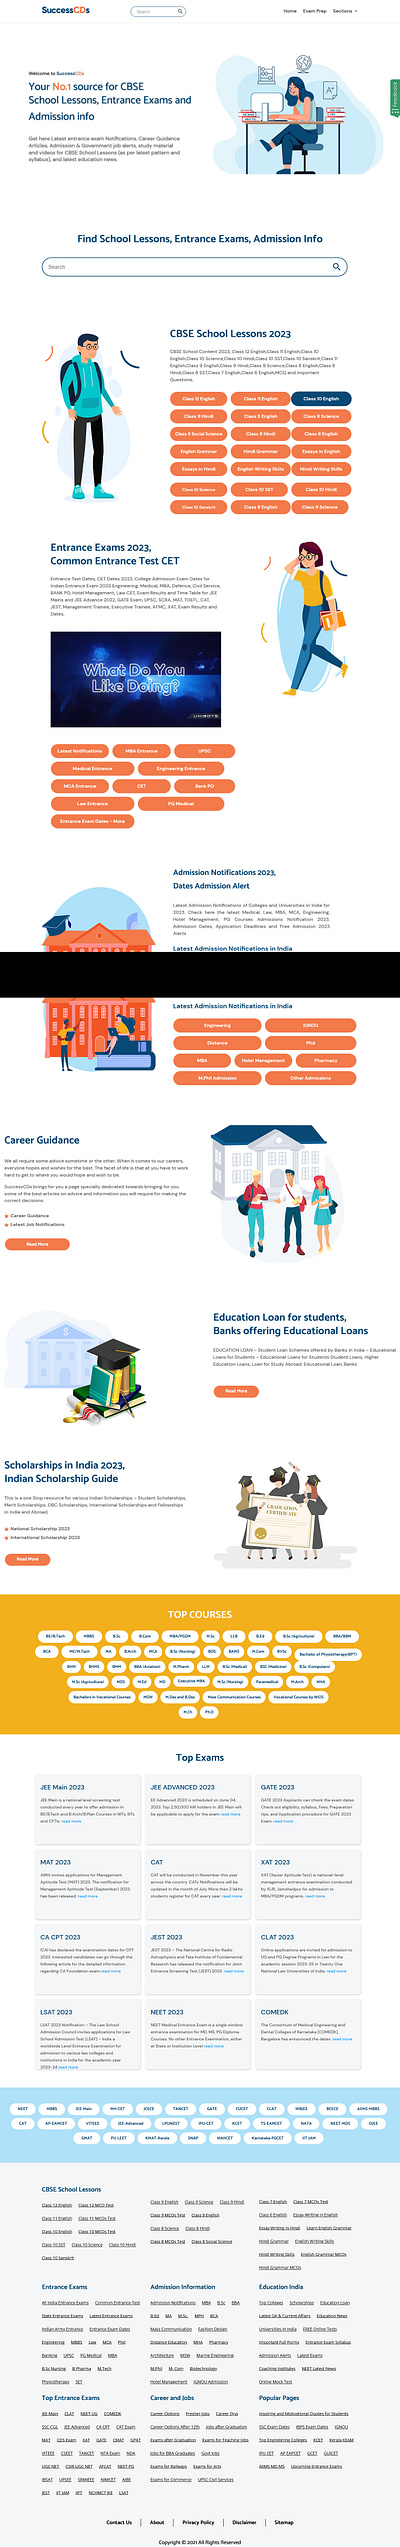 Laravel website for Top Portal Focused On Higher Education bootstrap branding design educational entrace exams javascript jquery landing page laravel php tag manager web analytics website development